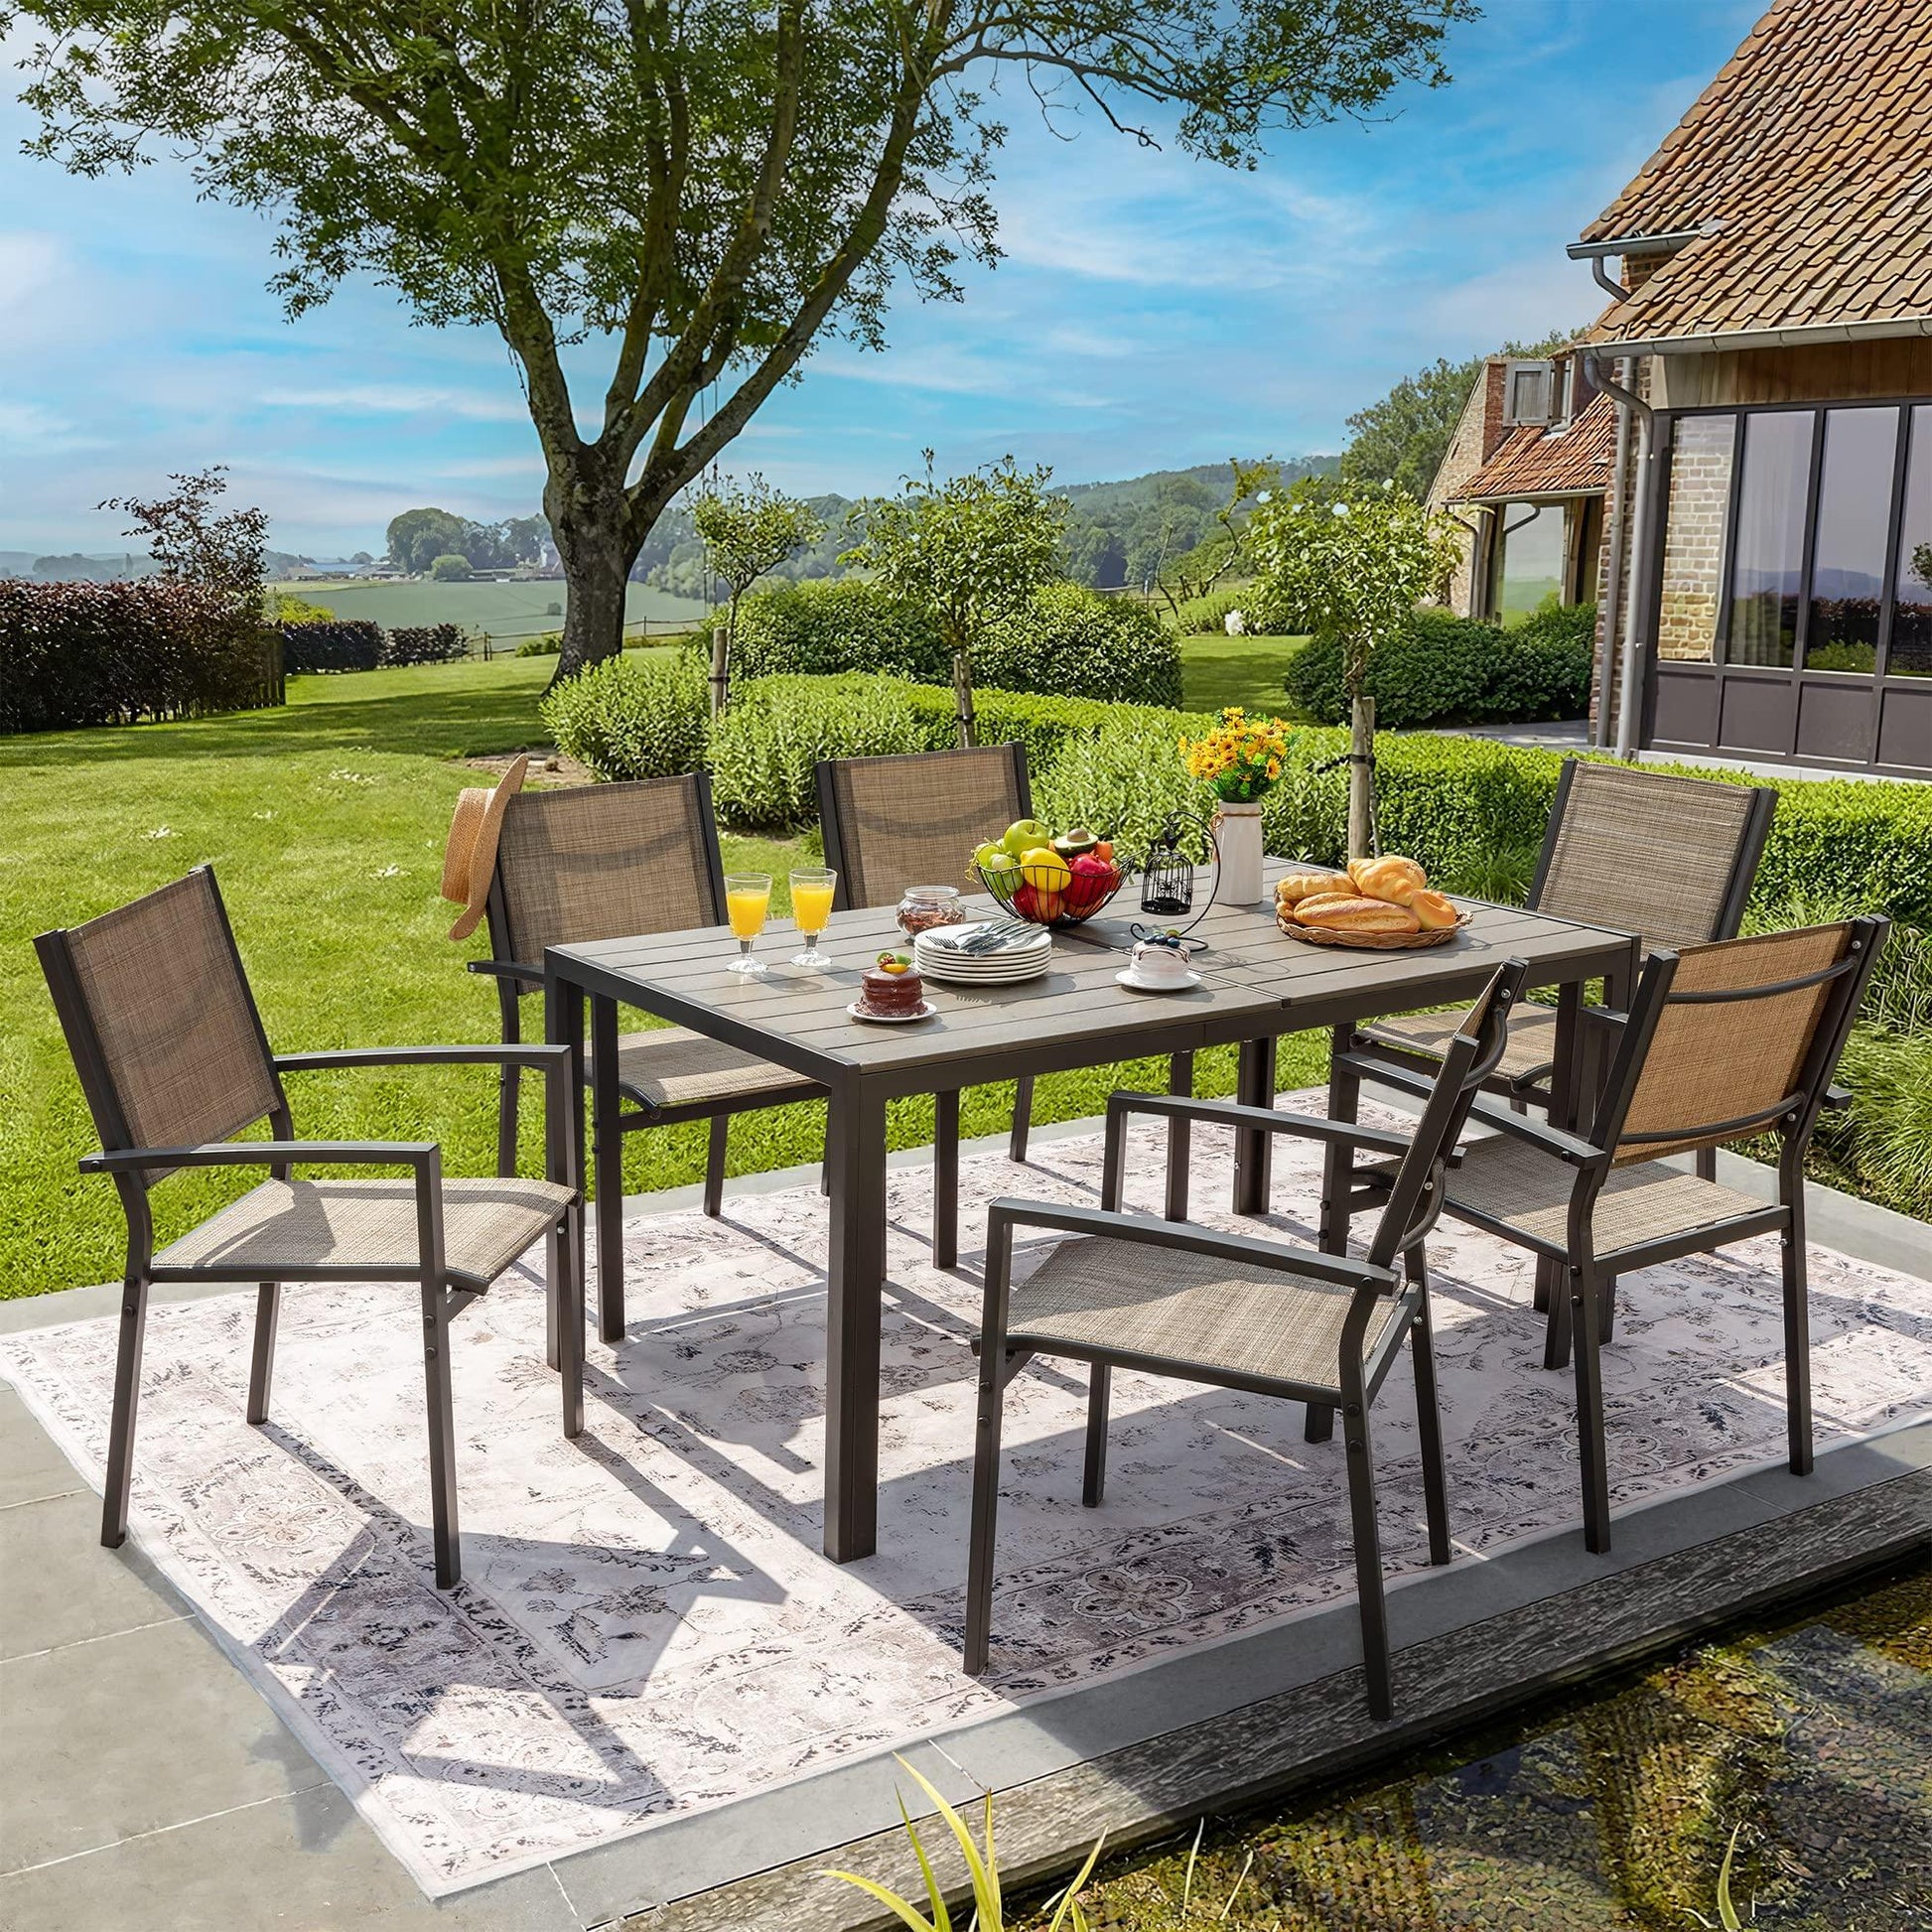 Flamaker Patio Dining Set 7 Piece Metal Frame Outdoor Furniture with 6 Textilene Chairs and Rectangular Table Family Kitchen Conversation Set for Backyard, Lawn, Terrace (Brown) - CookCave